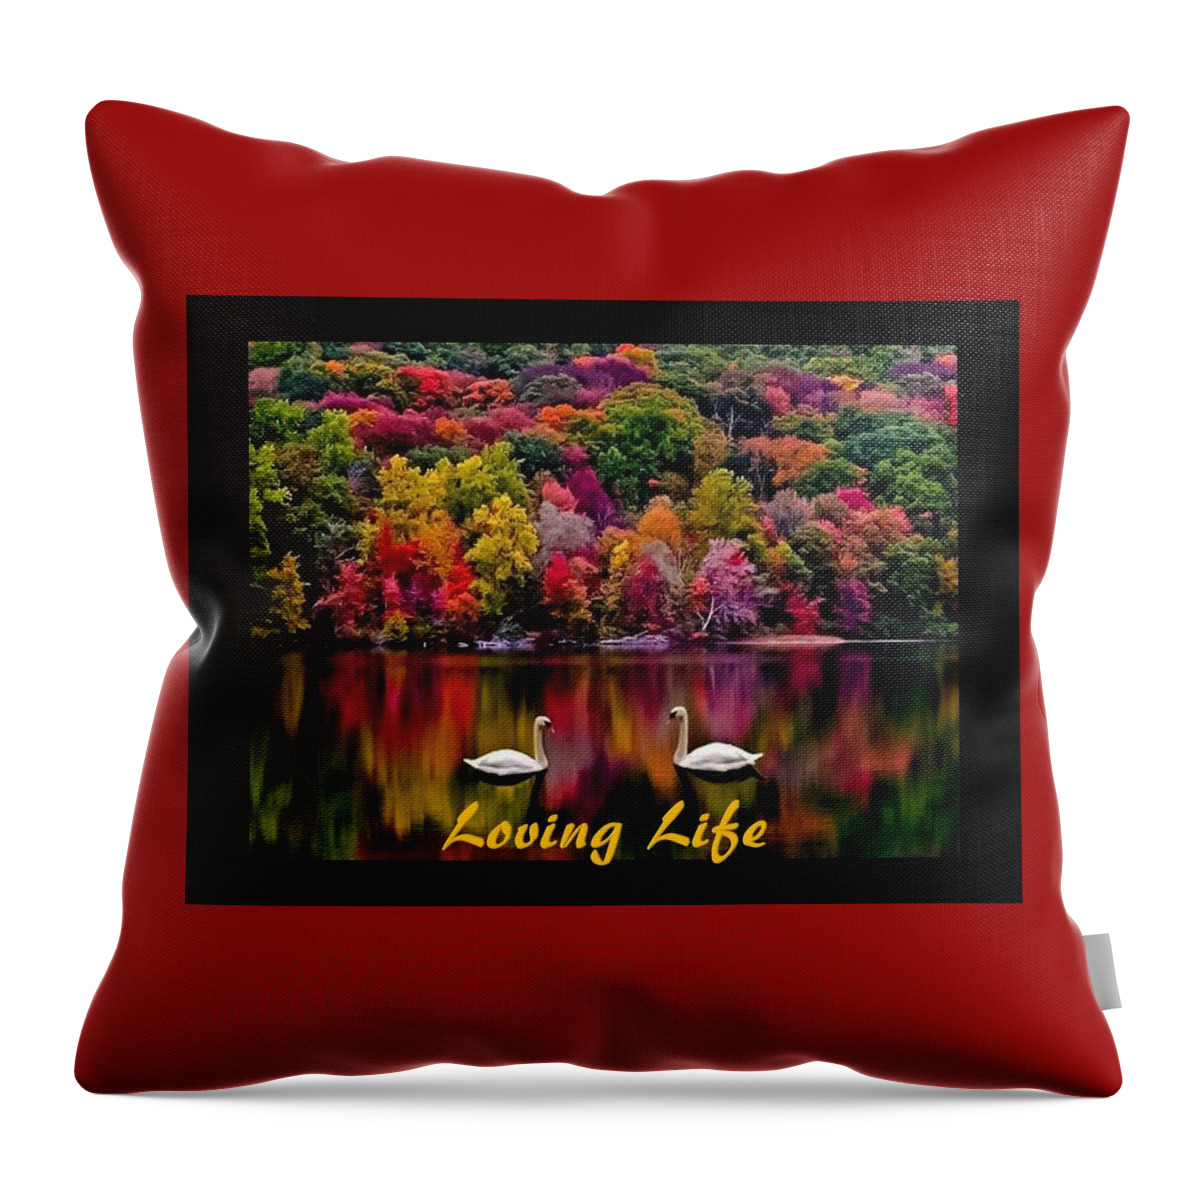 Swans Throw Pillow featuring the photograph Swans Loving Life by Nancy Ayanna Wyatt